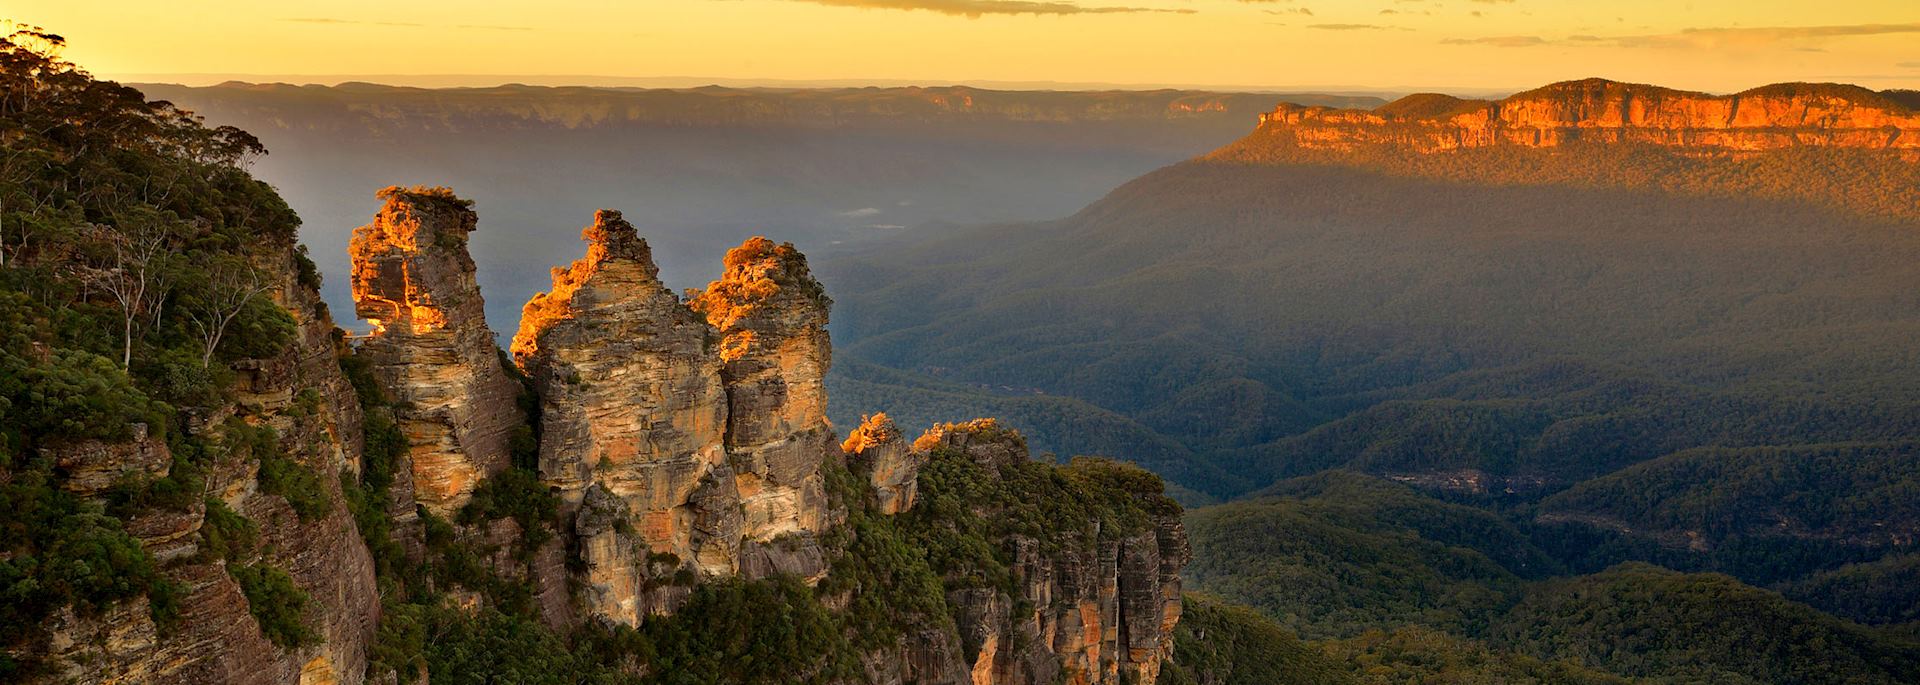 The Blue Mountains, New South Wales